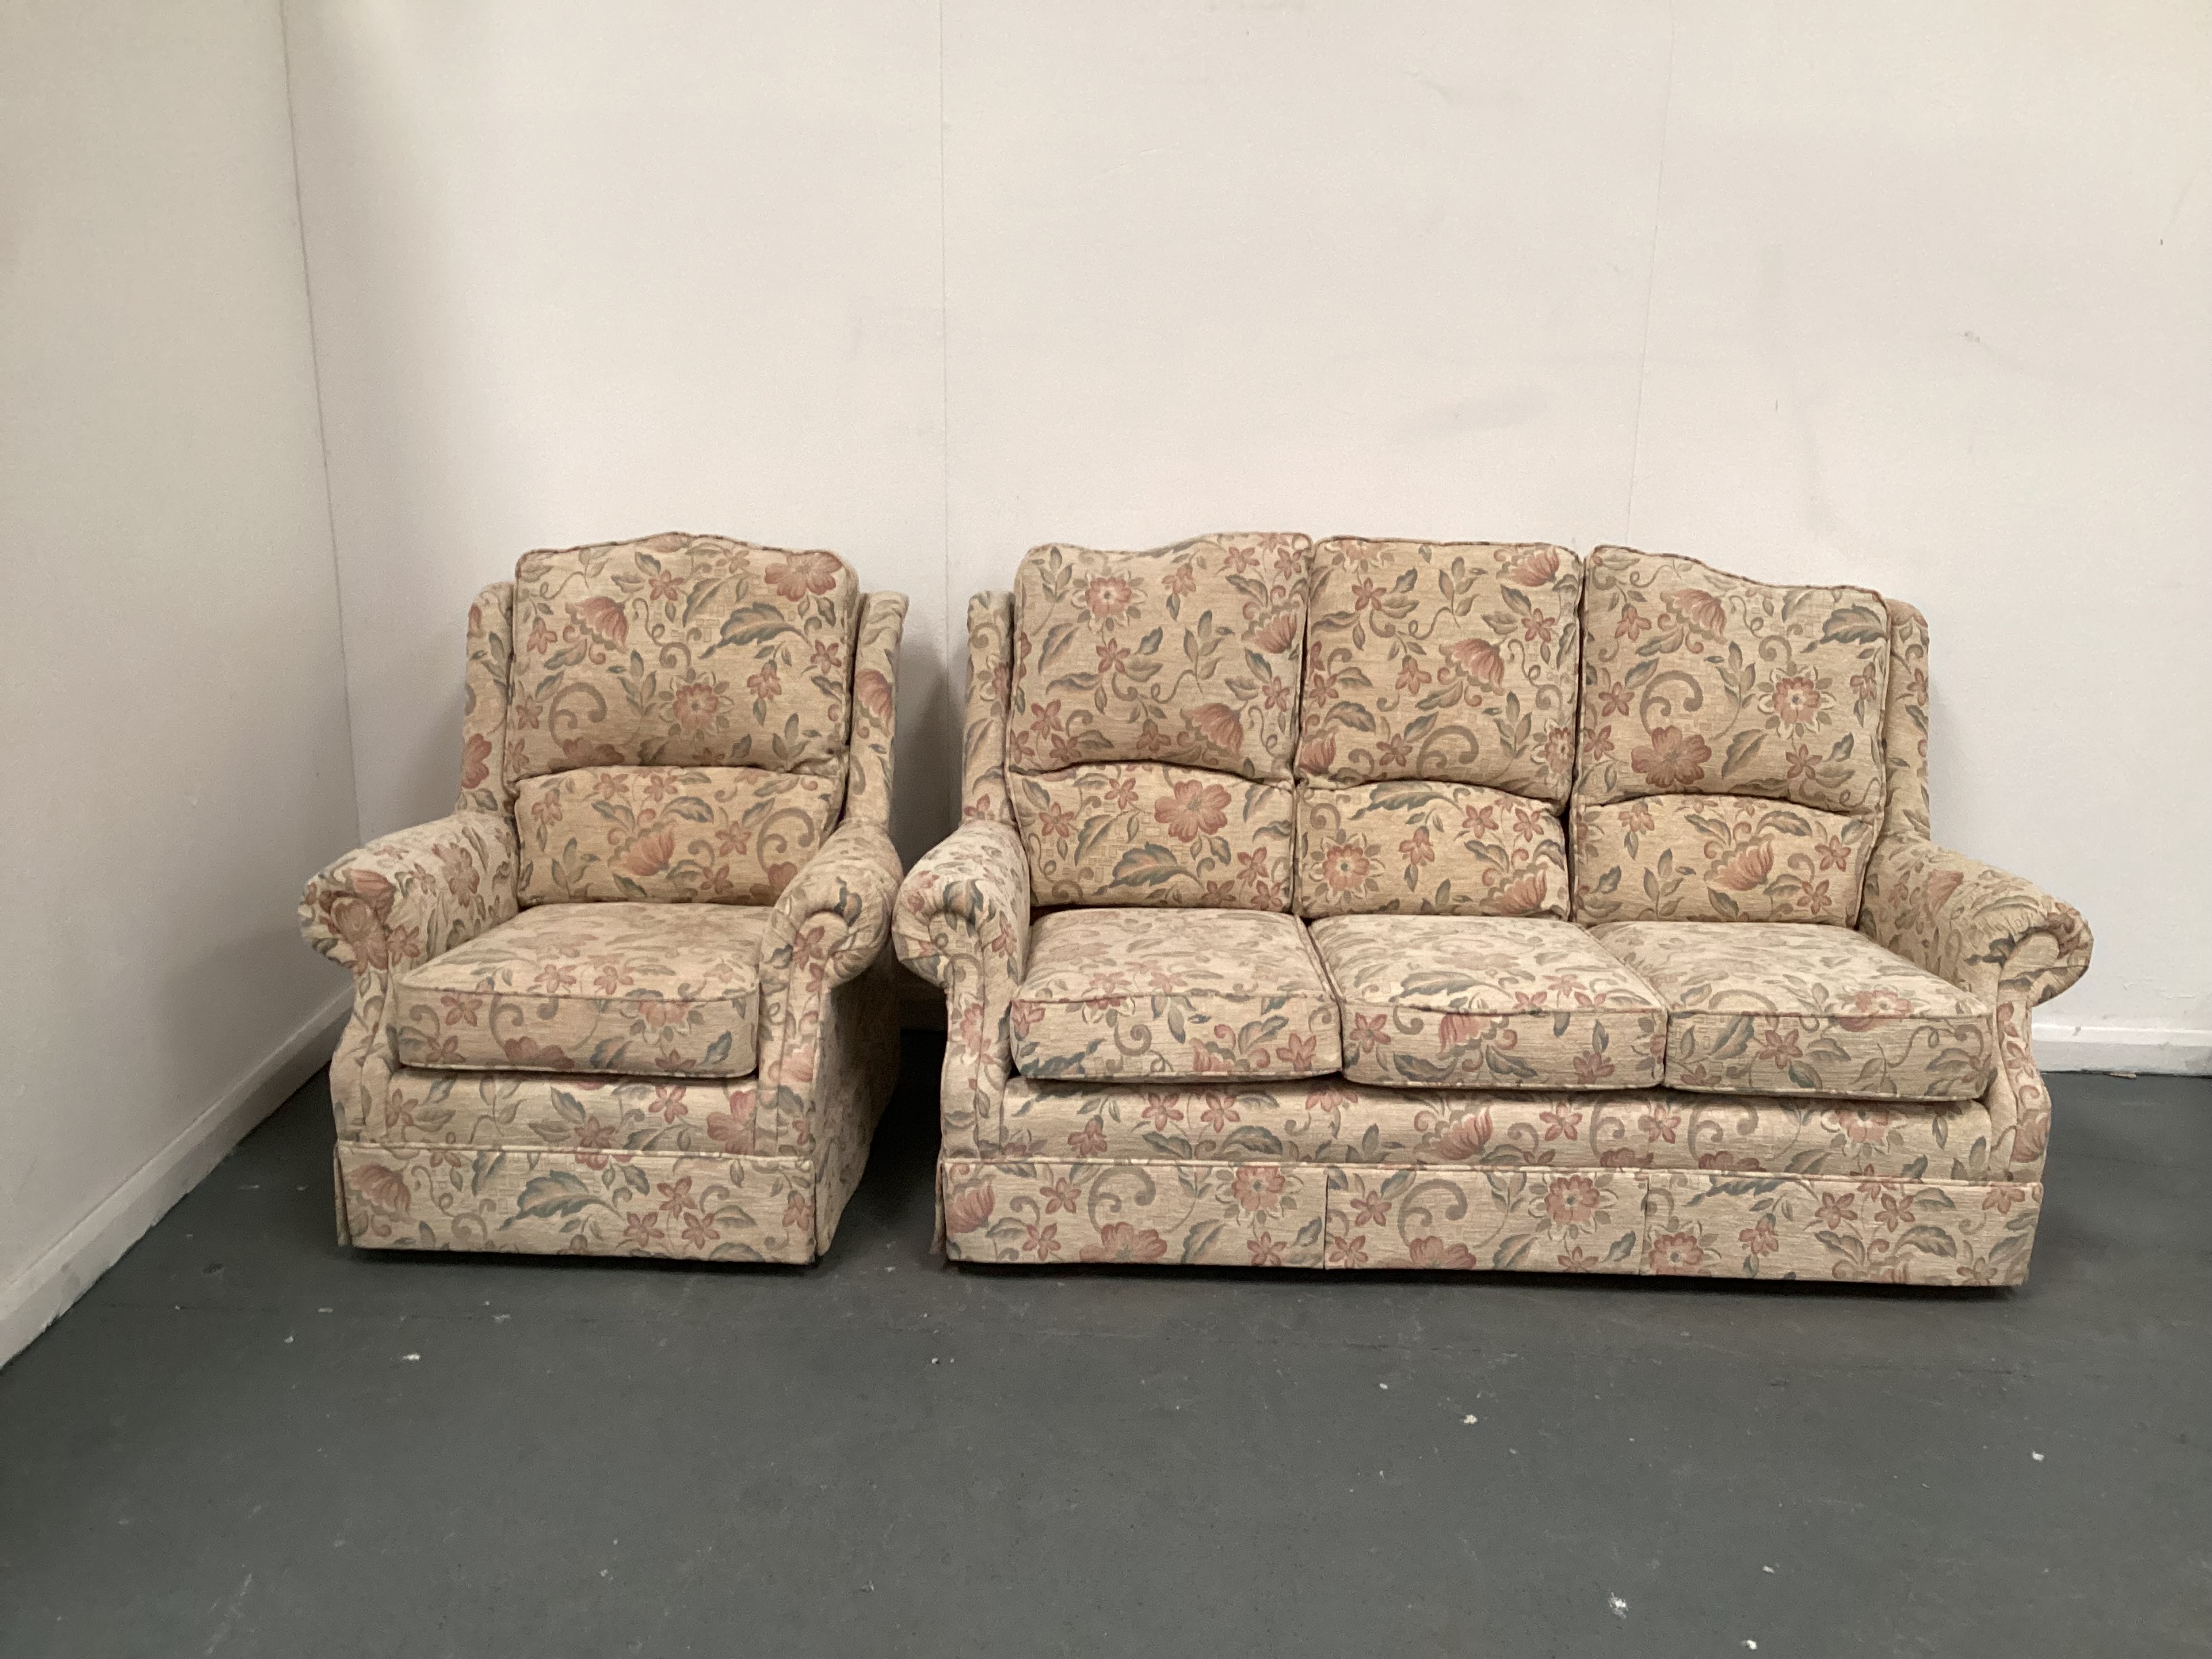    Beige Floral 3 Seater Sofa and Armchair